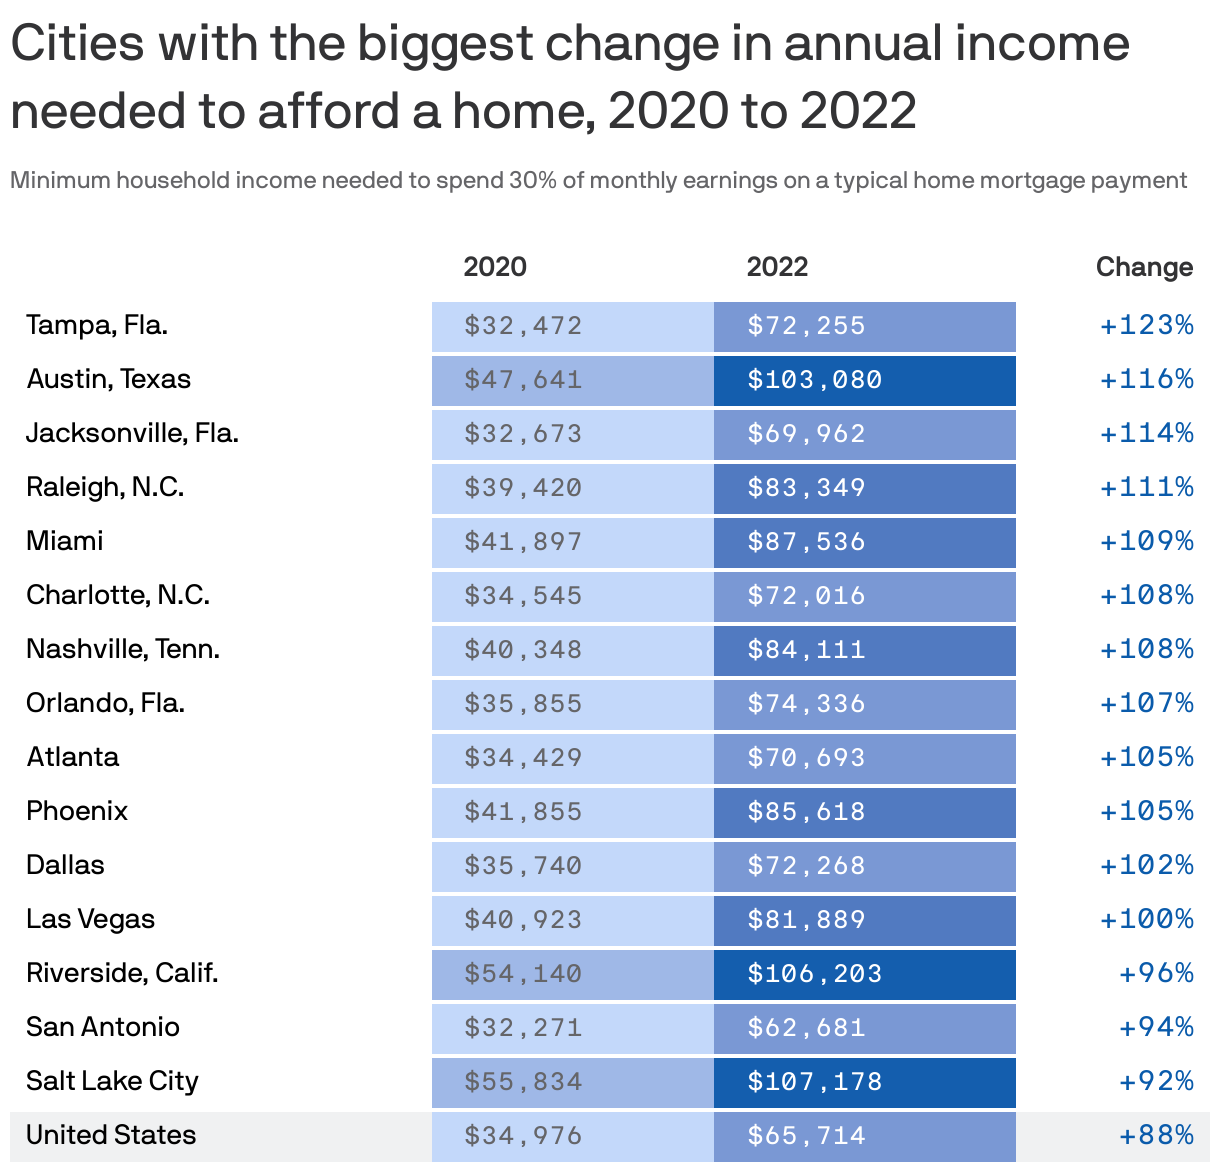 Cities with the biggest change in annual income needed to afford a home, 2020 to 2022